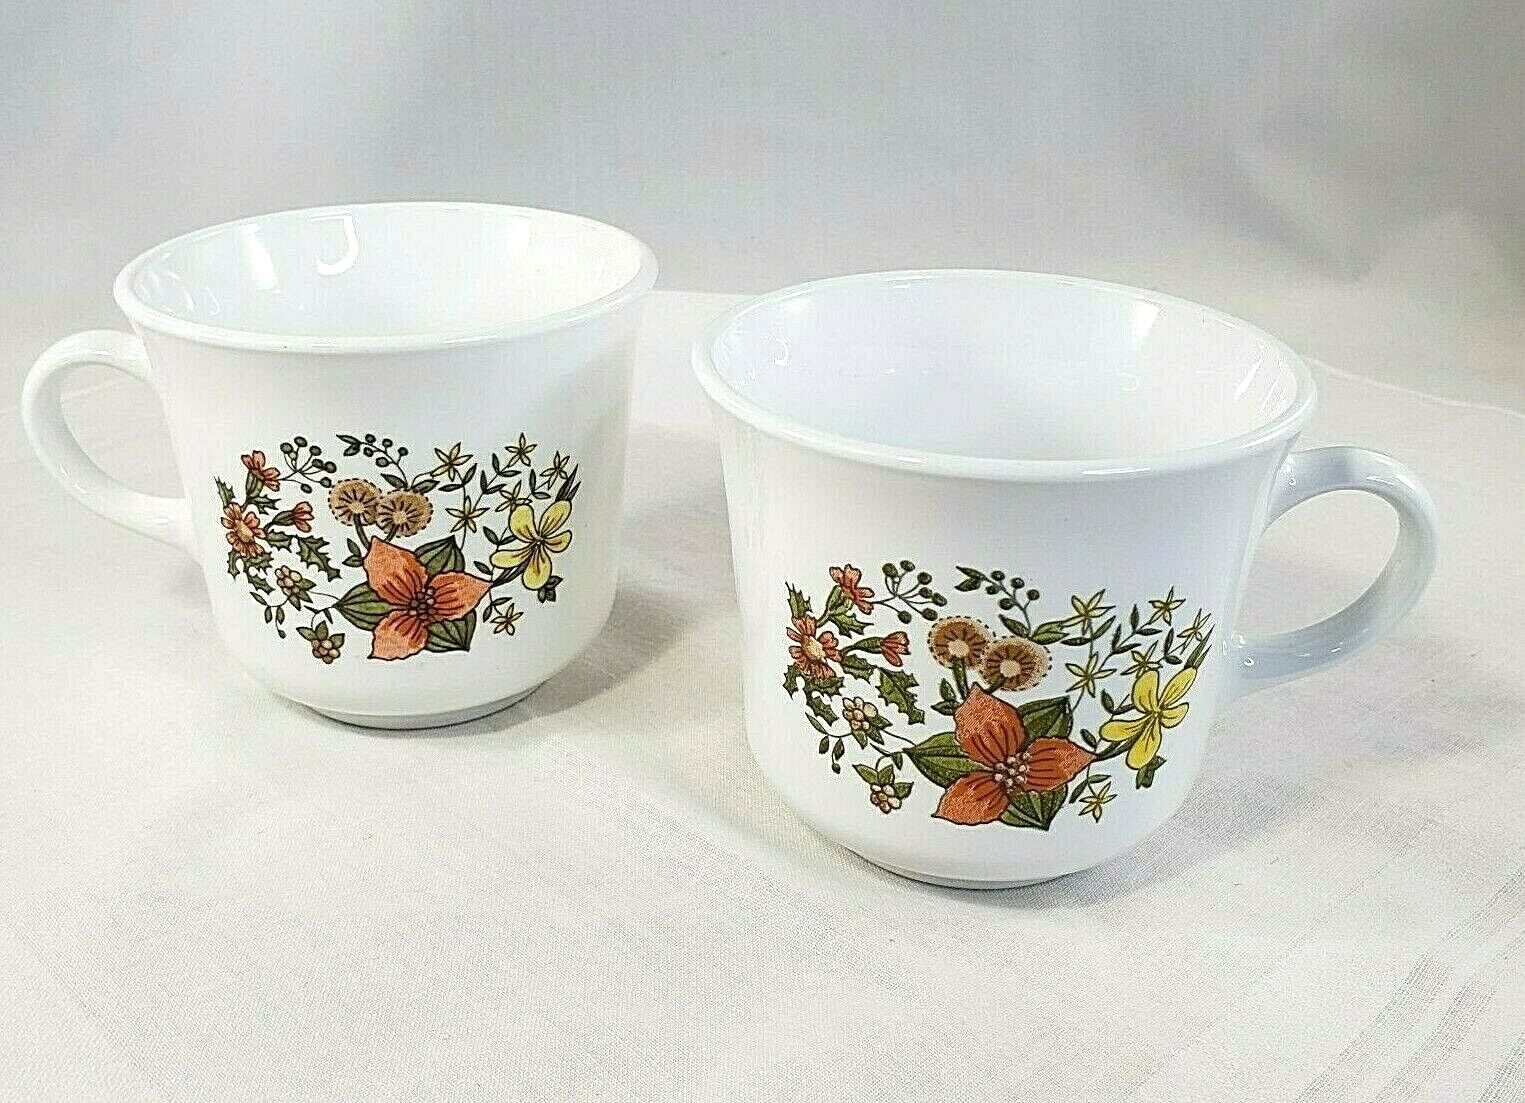 Lot of 2 Corelle by Corning Mugs Cups Coffee Tea Vintage Floral Indian  Summer